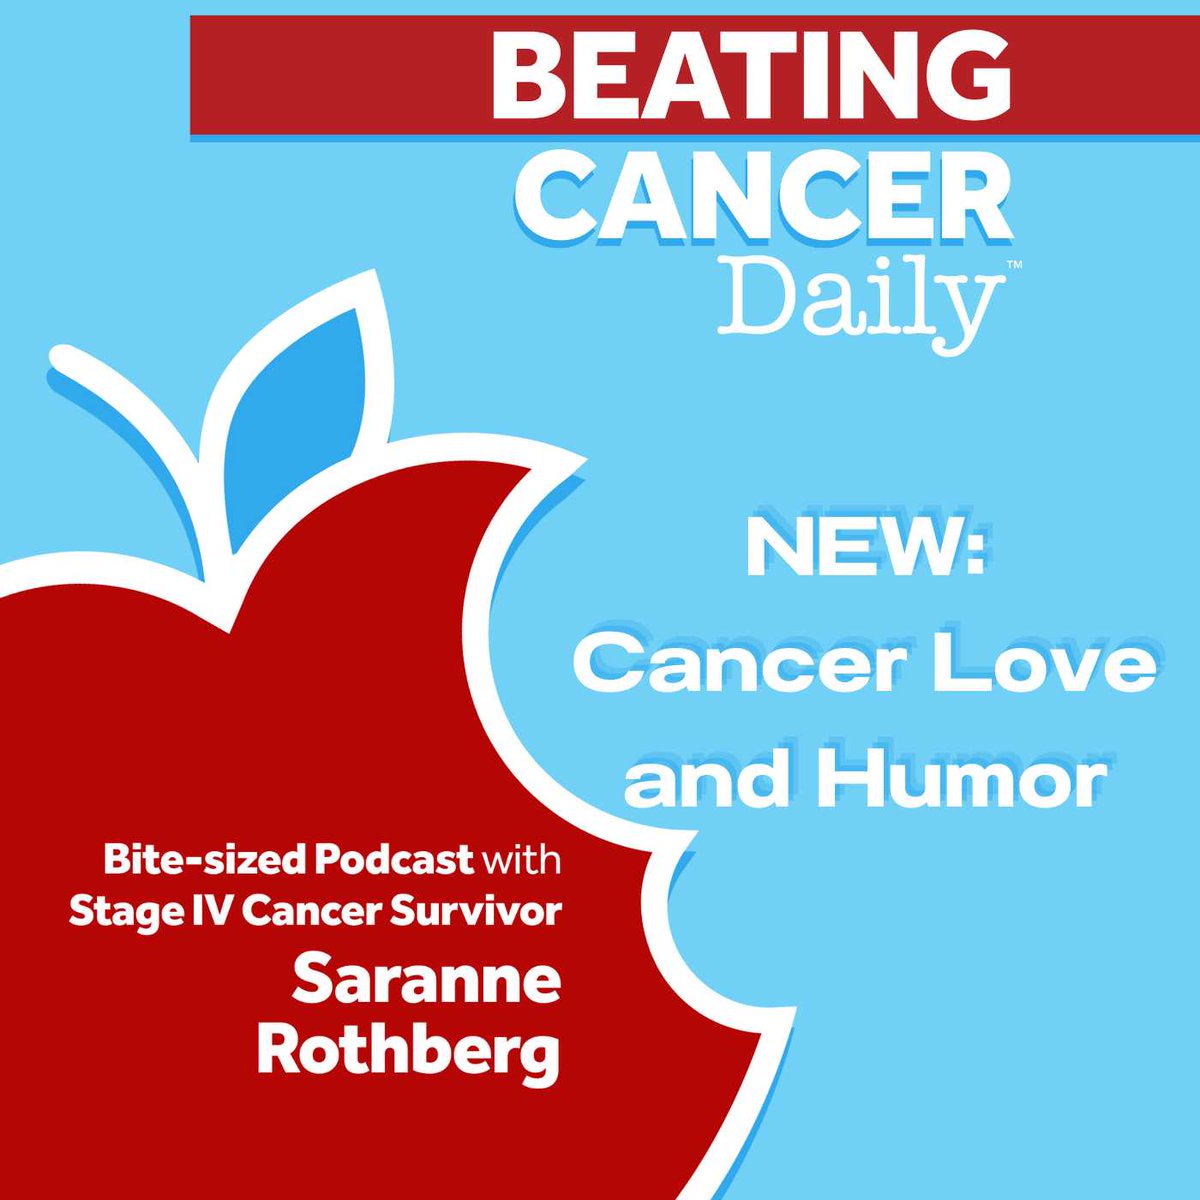 Today on #BeatingCancerDaily, NEW: Cancer Love and Humor
Listen wherever you listen to podcasts. 
ComedyCures.org

#ComedyCures #LaughDaily #InstaLaugh #laughtherapy #NonProfit #nonprofitlife #standupcomedian #survivor #remission #cancersurvivor #cancertreatment